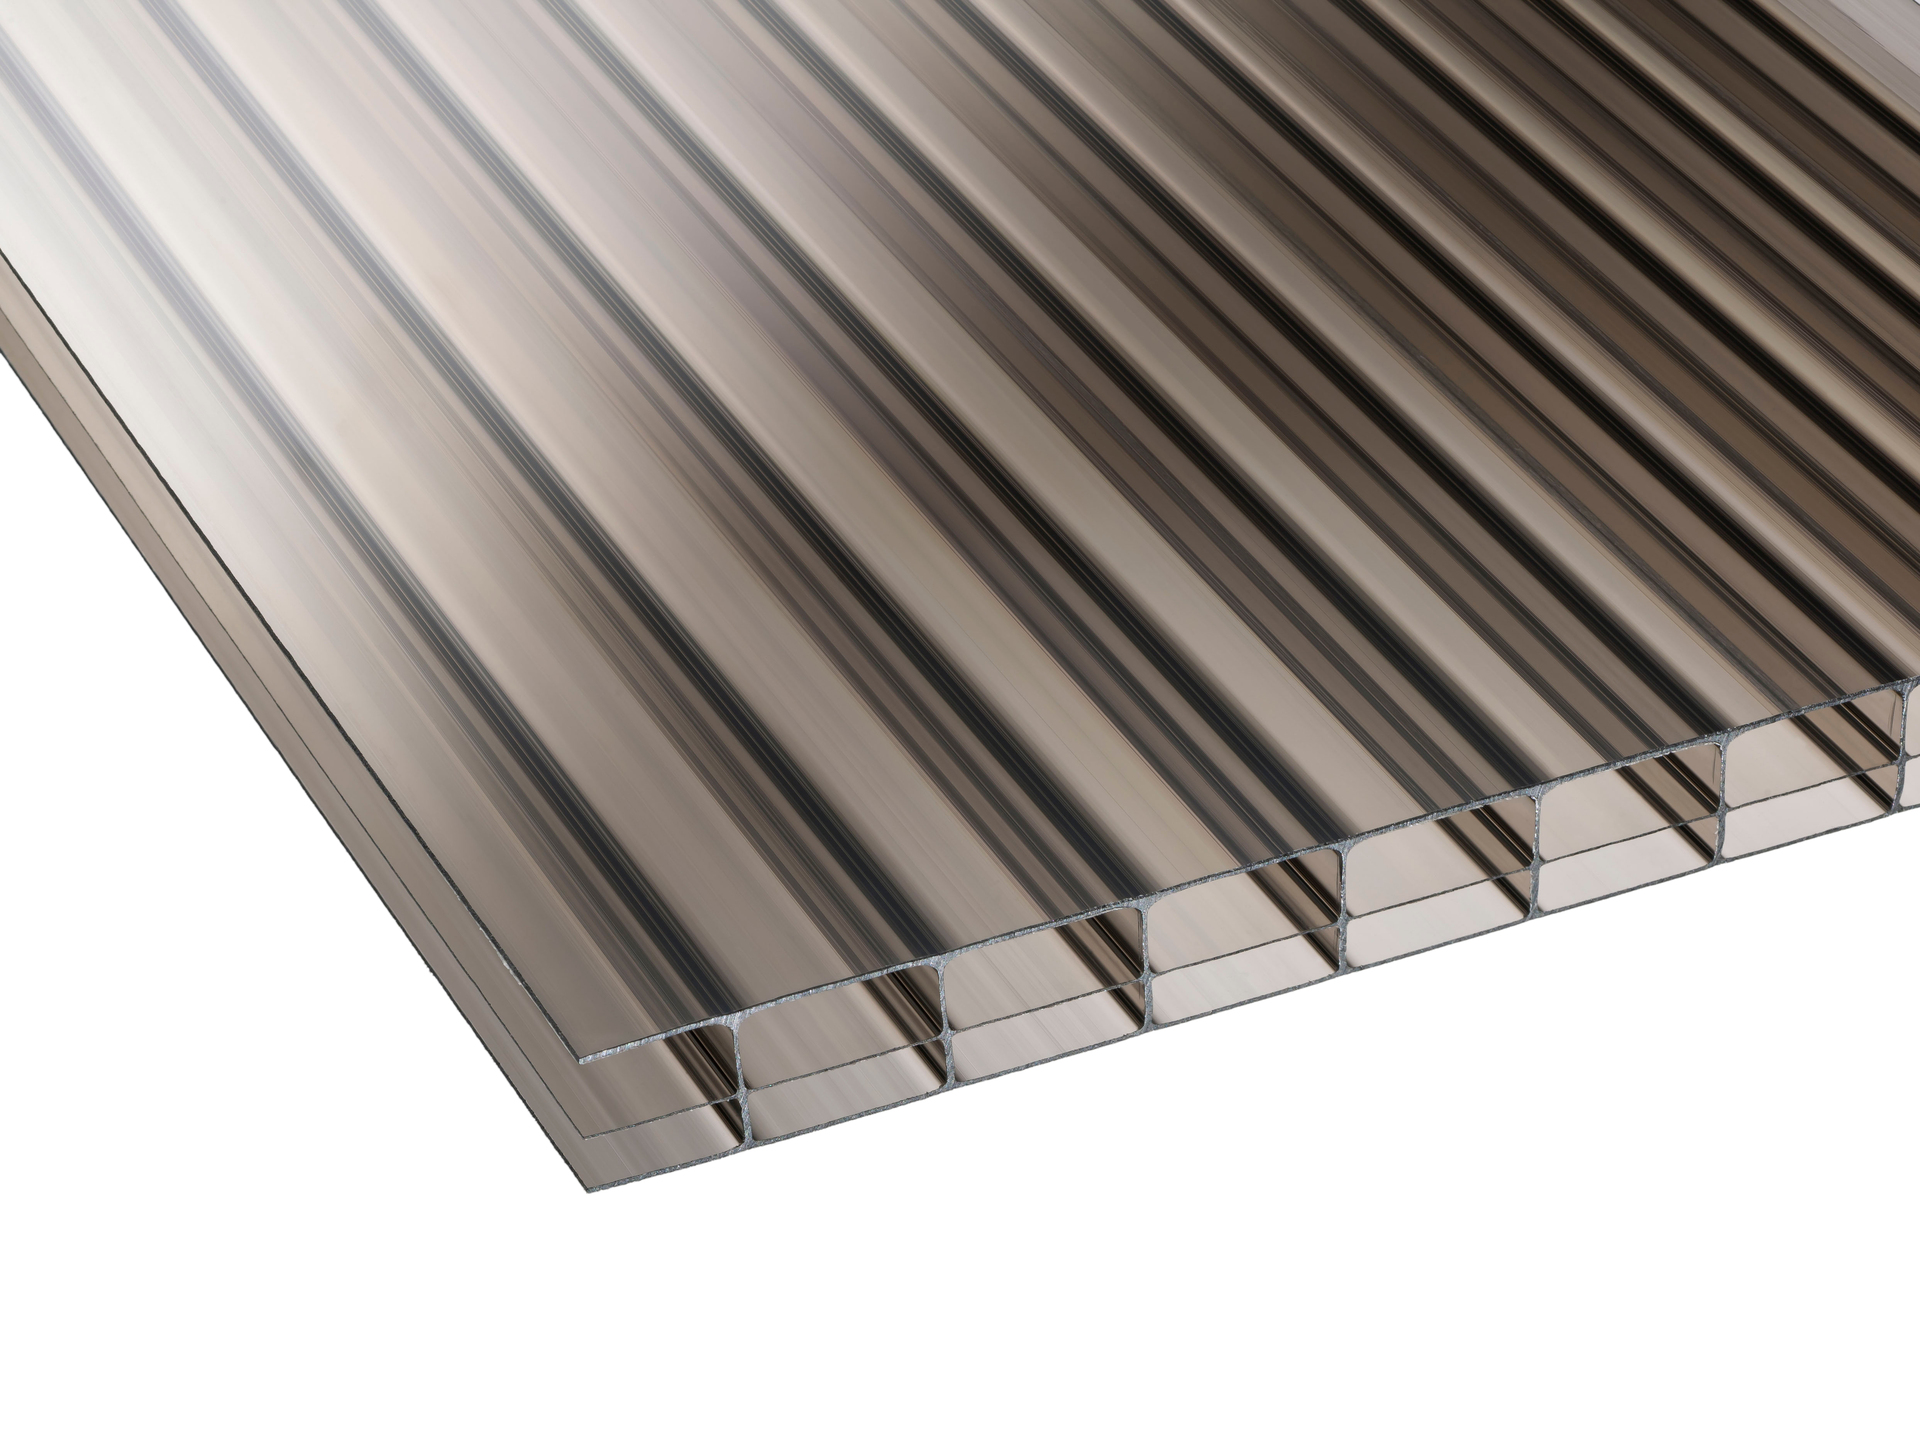 Image of 16mm Bronze Multiwall Polycarbonate Sheet - 2000 x 700mm